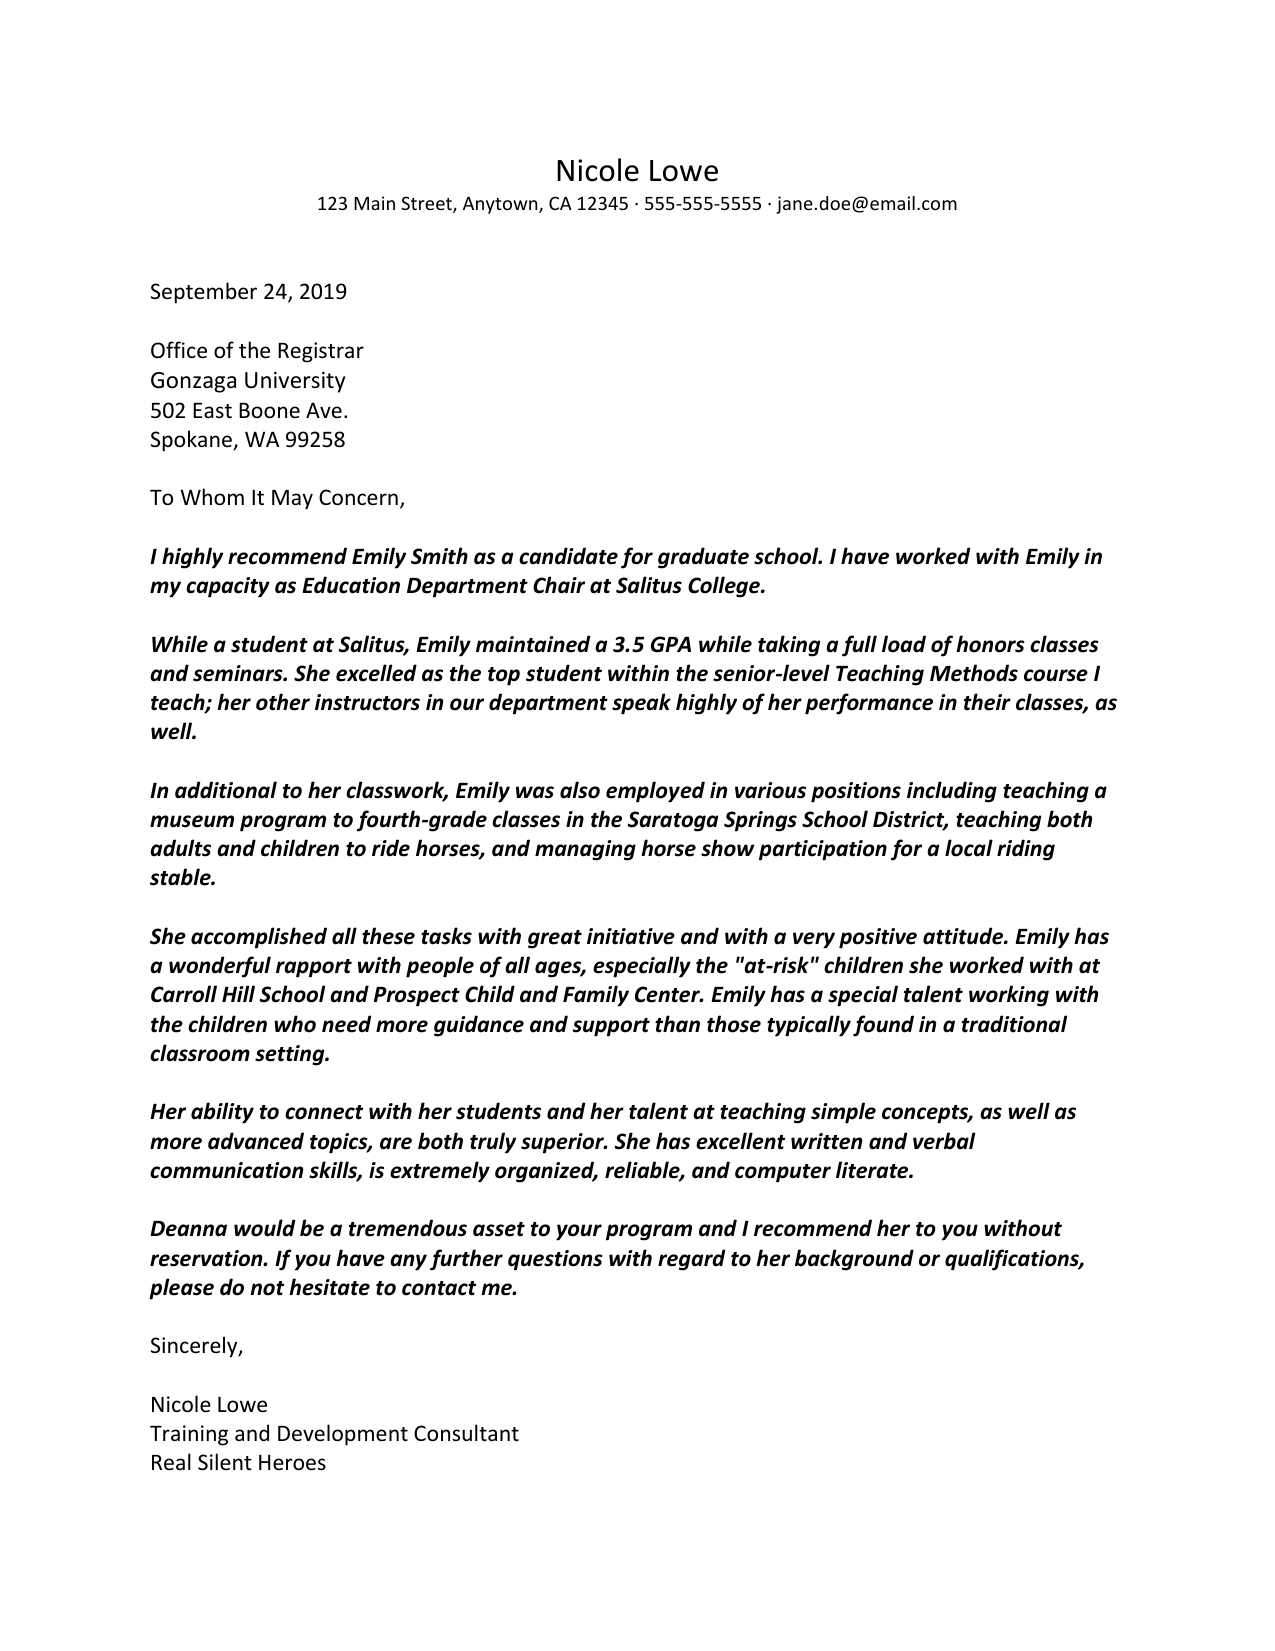 Letter Of Recommendation Template within size 1275 X 1651